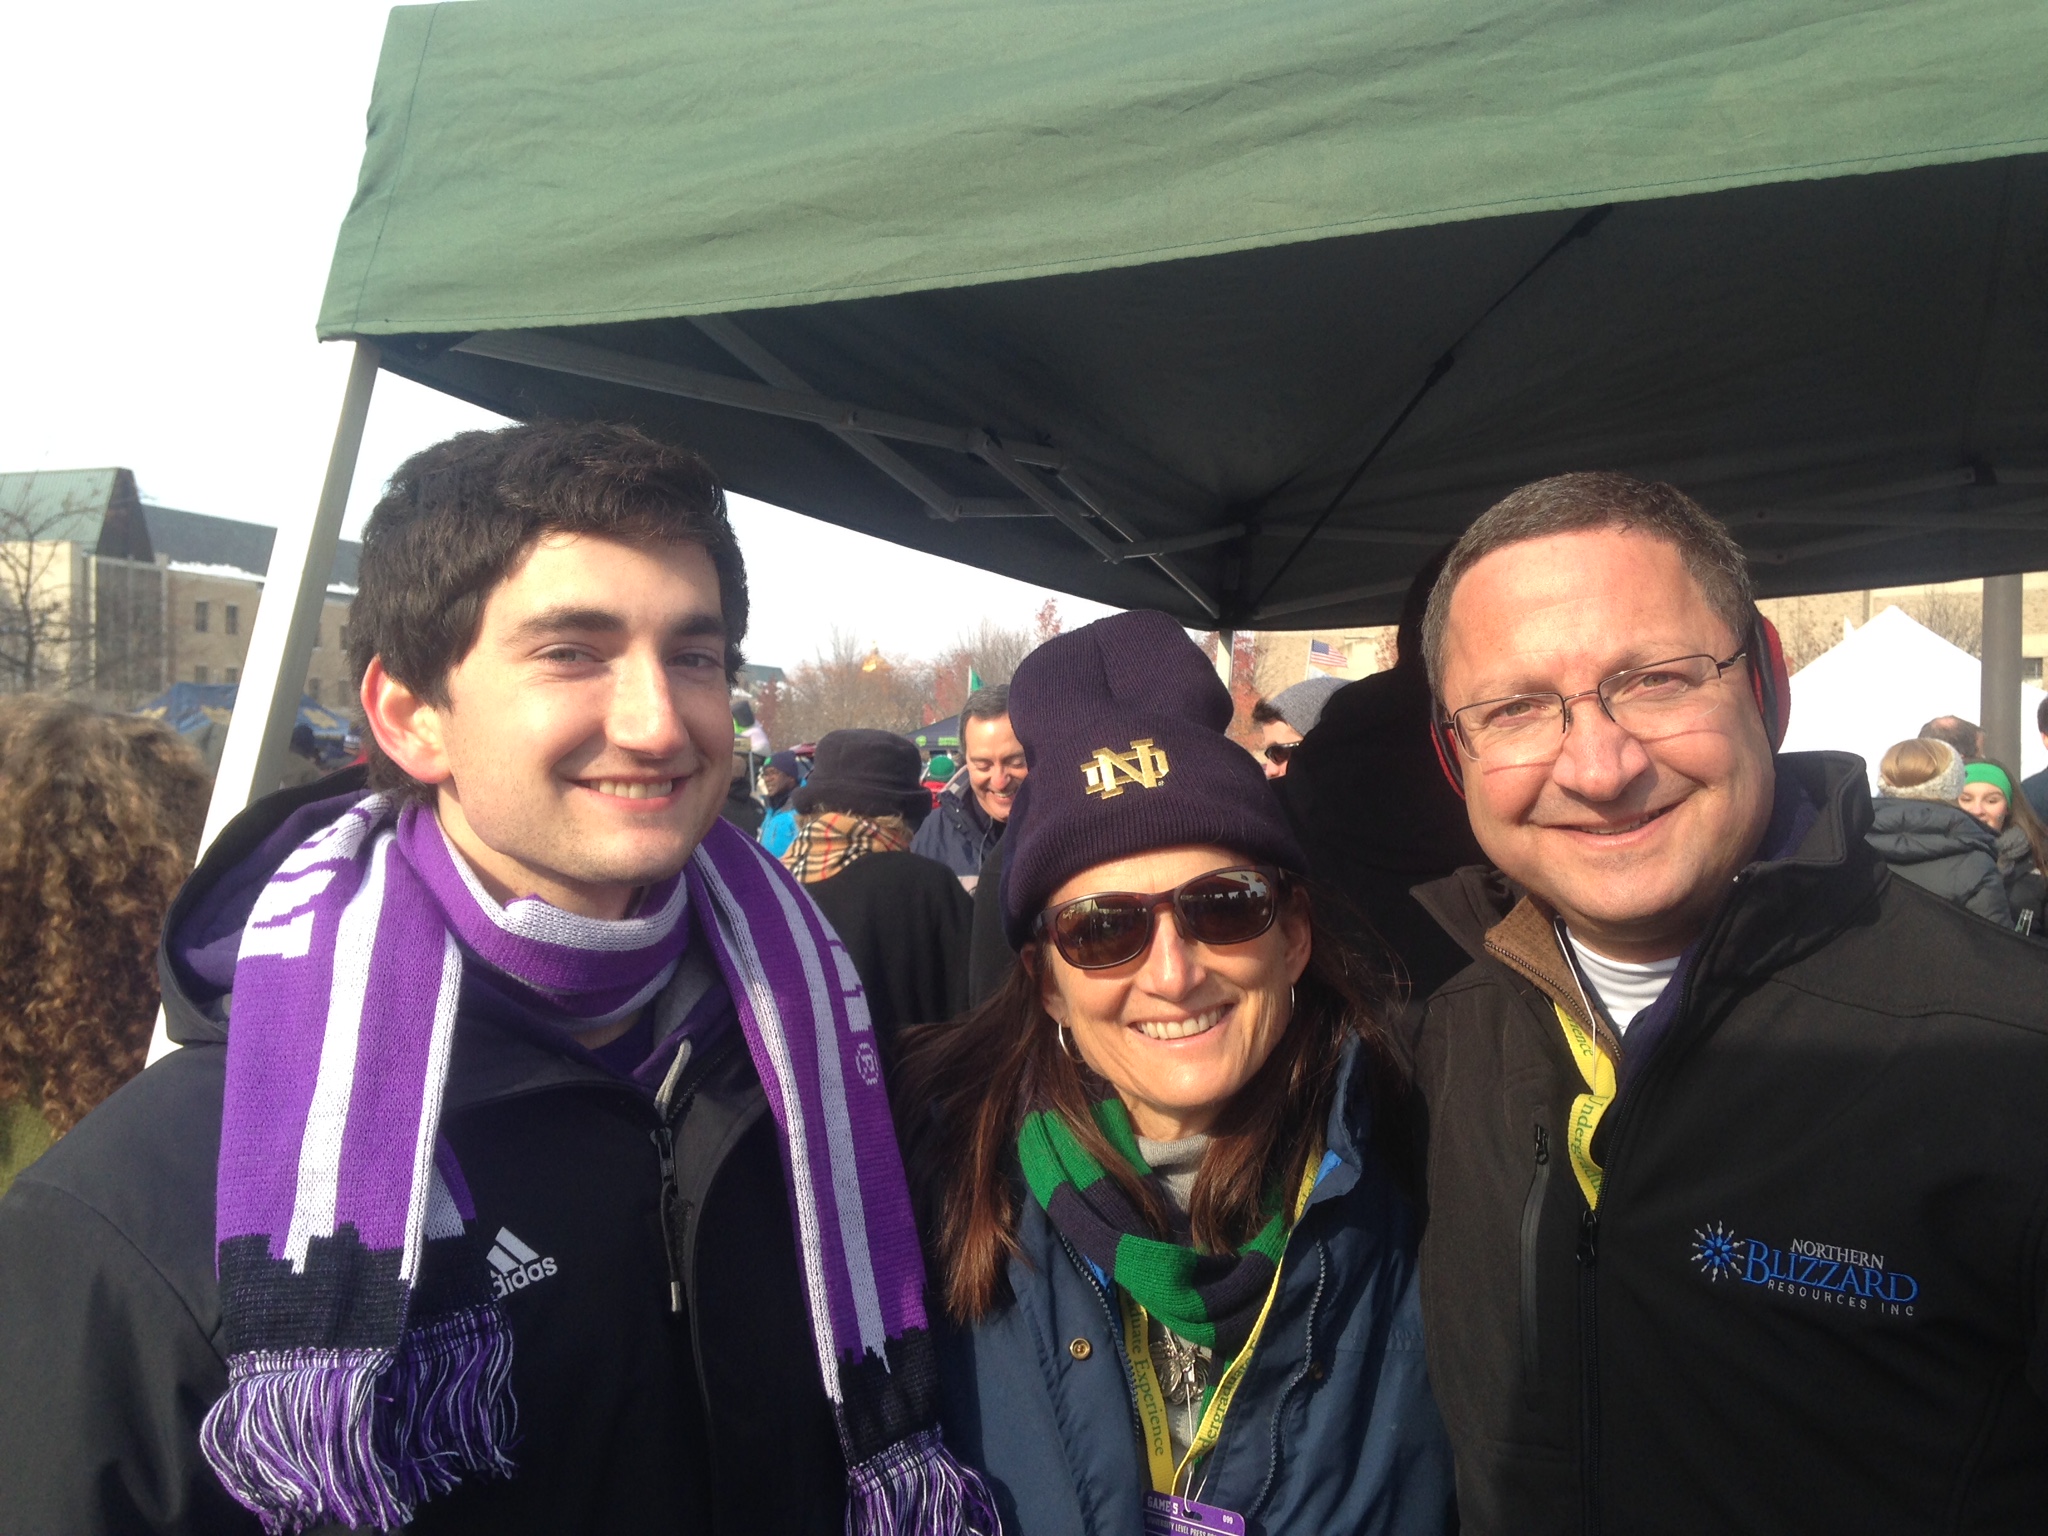 Daniel, me and my husband Ken at the tailgate